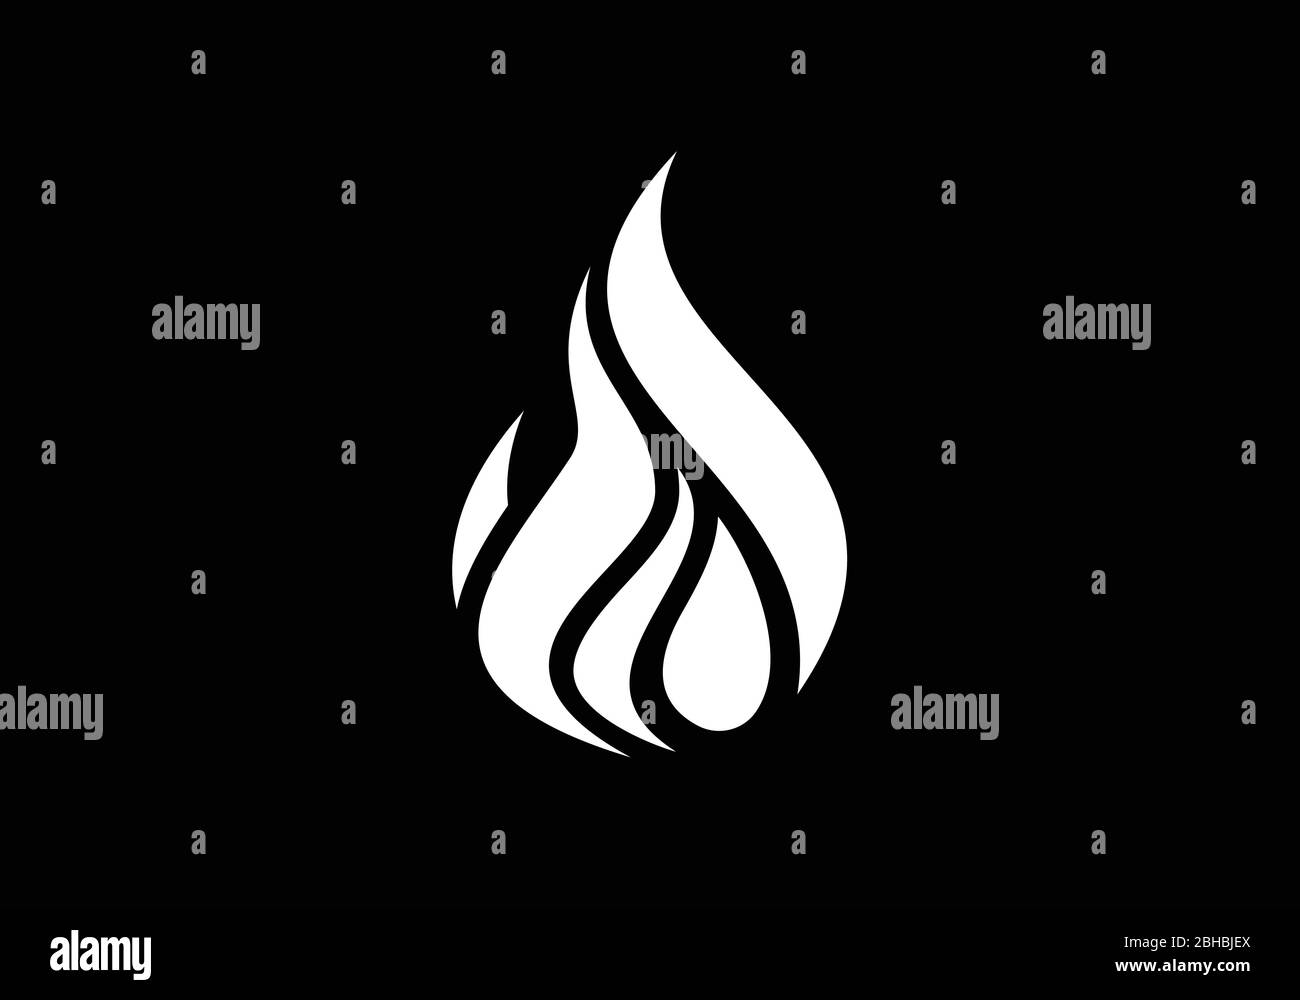 Flame logo design. Fire icon, oil and gas industry symbol isolated on black background Stock Vector